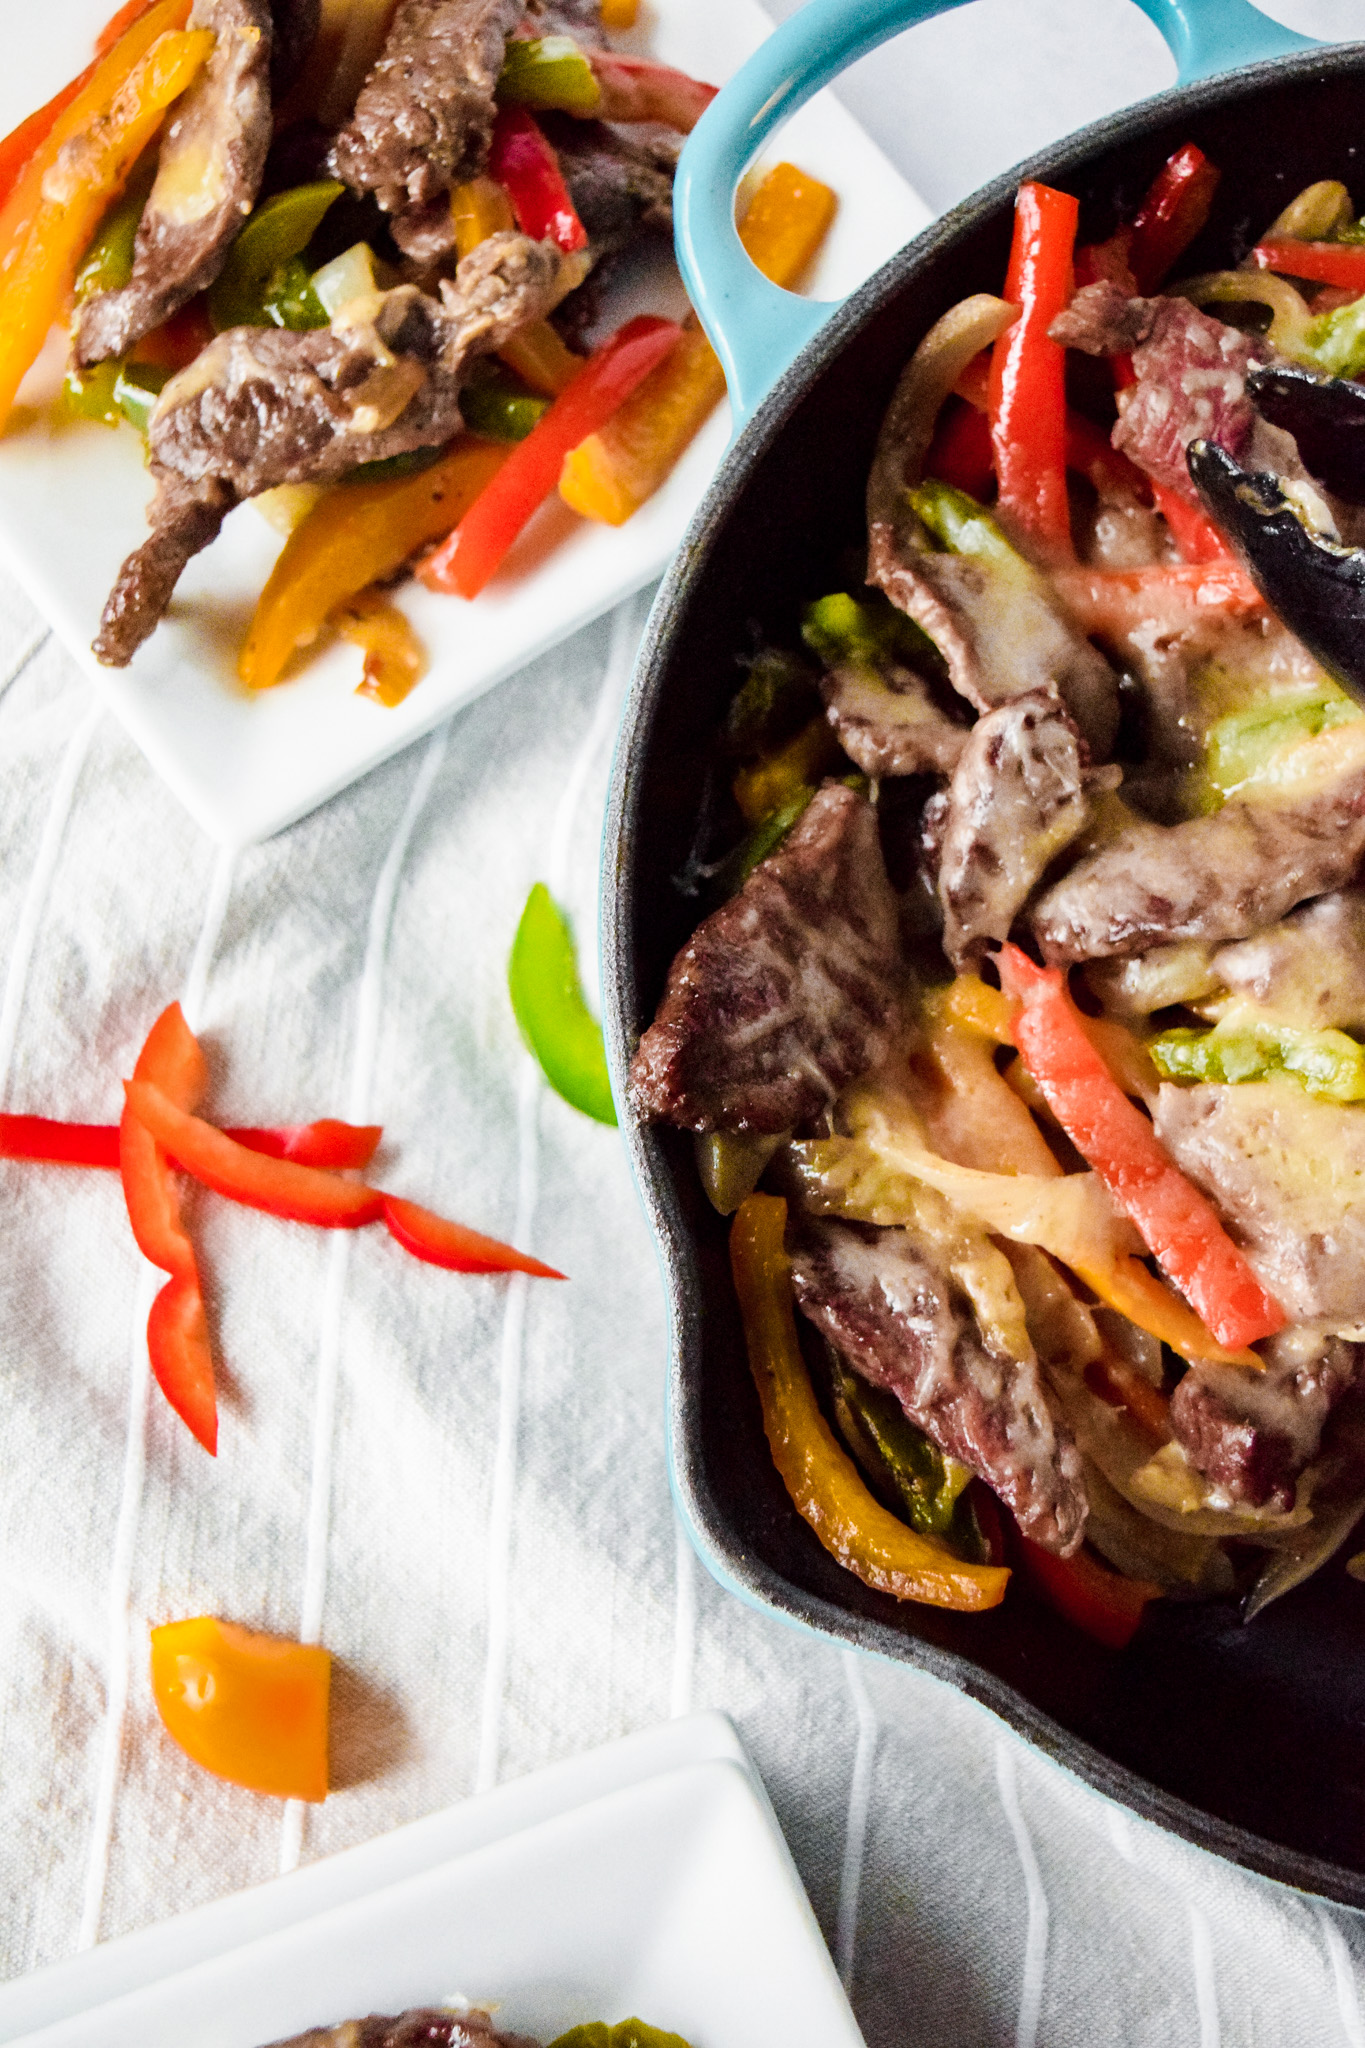 Le creuset teal skillet with sautéed steak, peppers, and onions